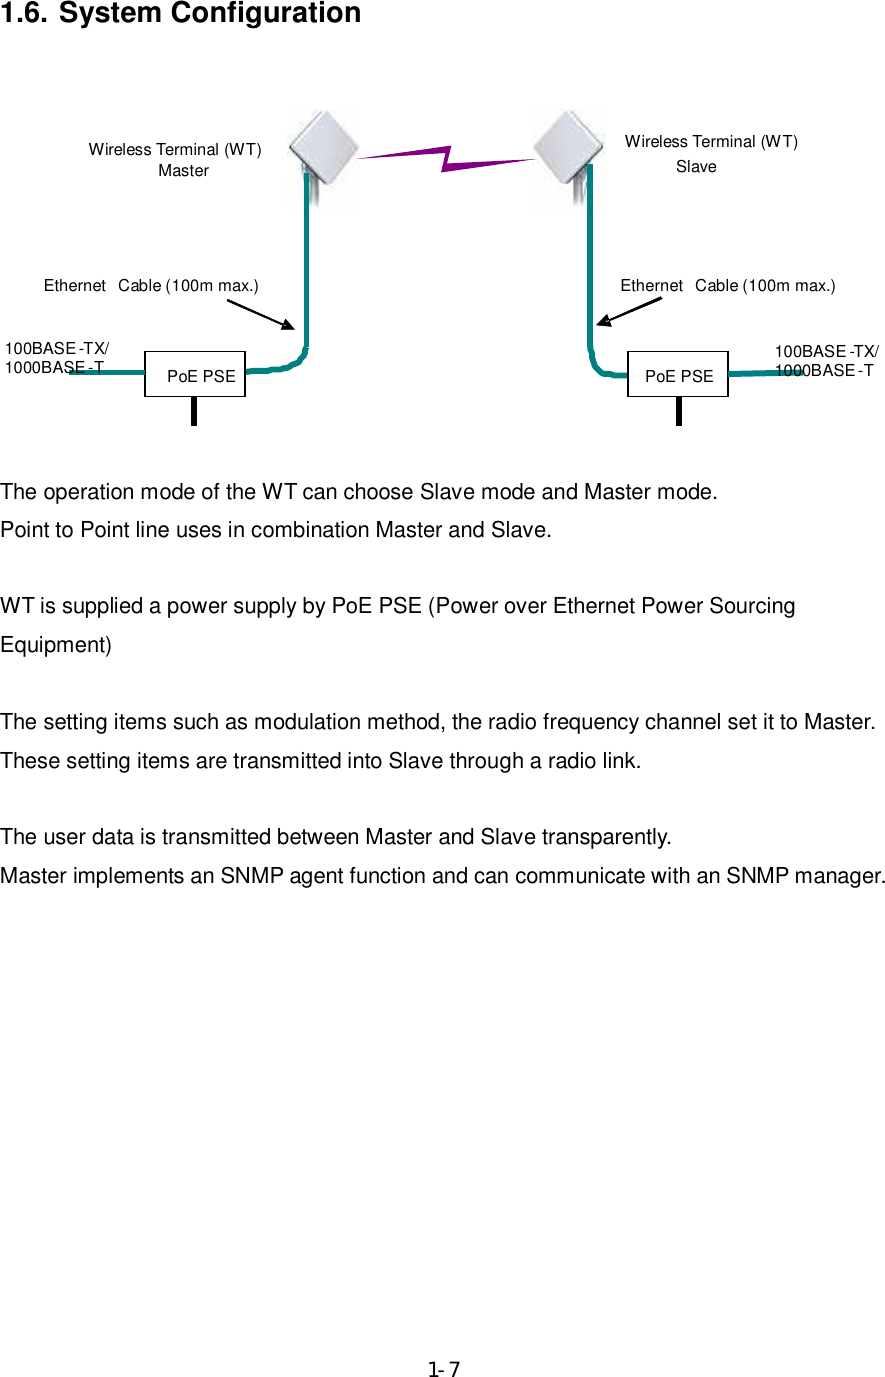  1-7  1.6. System Configuration            The operation mode of the WT can choose Slave mode and Master mode. Point to Point line uses in combination Master and Slave.  WT is supplied a power supply by PoE PSE (Power over Ethernet Power Sourcing Equipment)  The setting items such as modulation method, the radio frequency channel set it to Master. These setting items are transmitted into Slave through a radio link.  The user data is transmitted between Master and Slave transparently. Master implements an SNMP agent function and can communicate with an SNMP manager.    Wireless Terminal (WT) Slave Ethernet Cable (100m max.) PoE PSE PoE PSE 100BASE - TX/ 1000BASE - T 100BASE - TX/ 1000BASE - T Wireless Terminal (WT) Master Ethernet Cable (100m max.) 